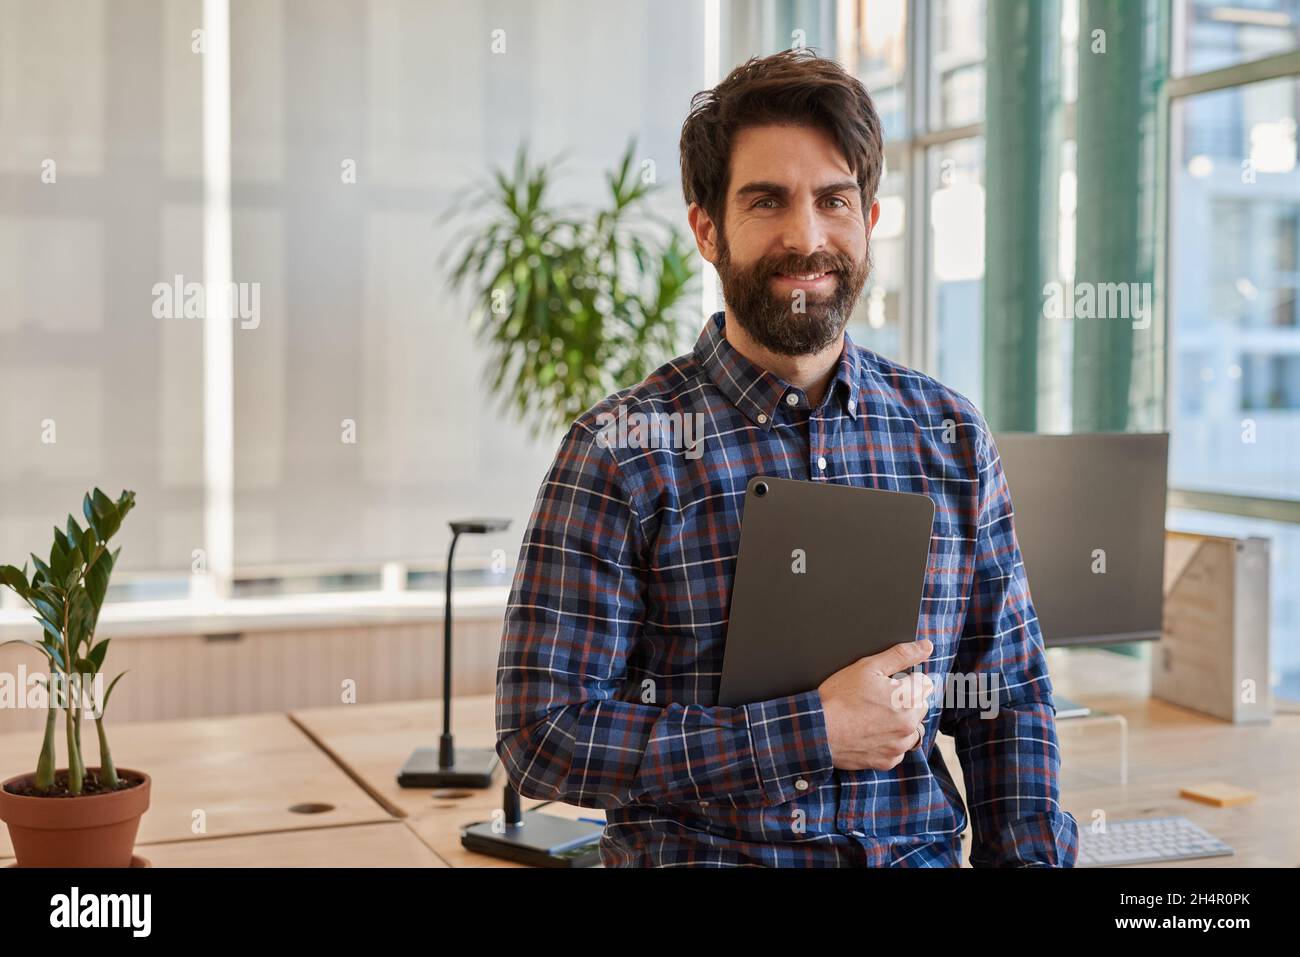 Smiling businessman leaning on his desk holding a digital tablet Stock Photo